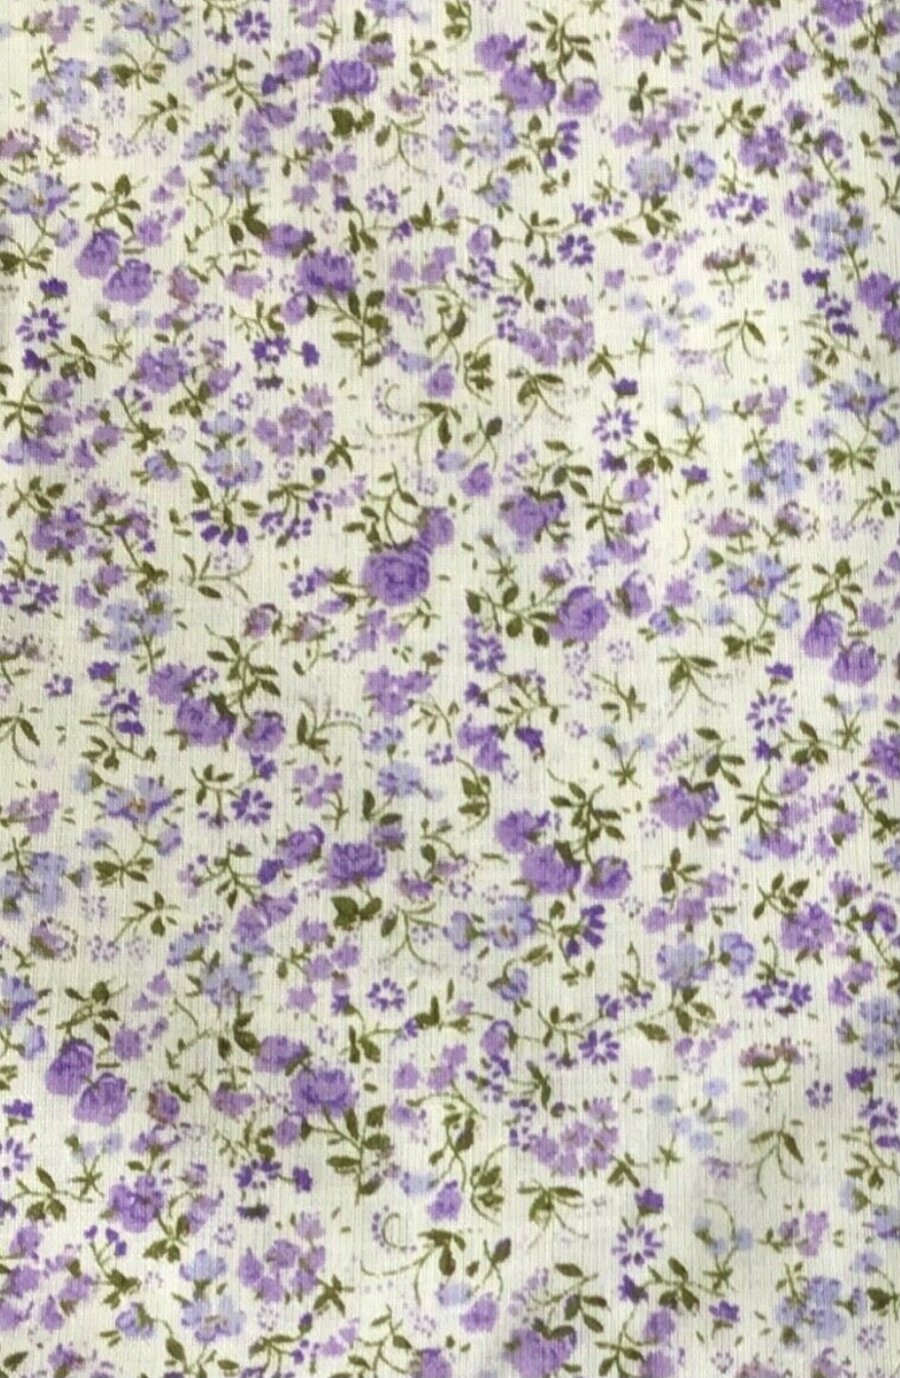 One Metre of a Pretty 100% Cotton Print, small lilac flowers on white background